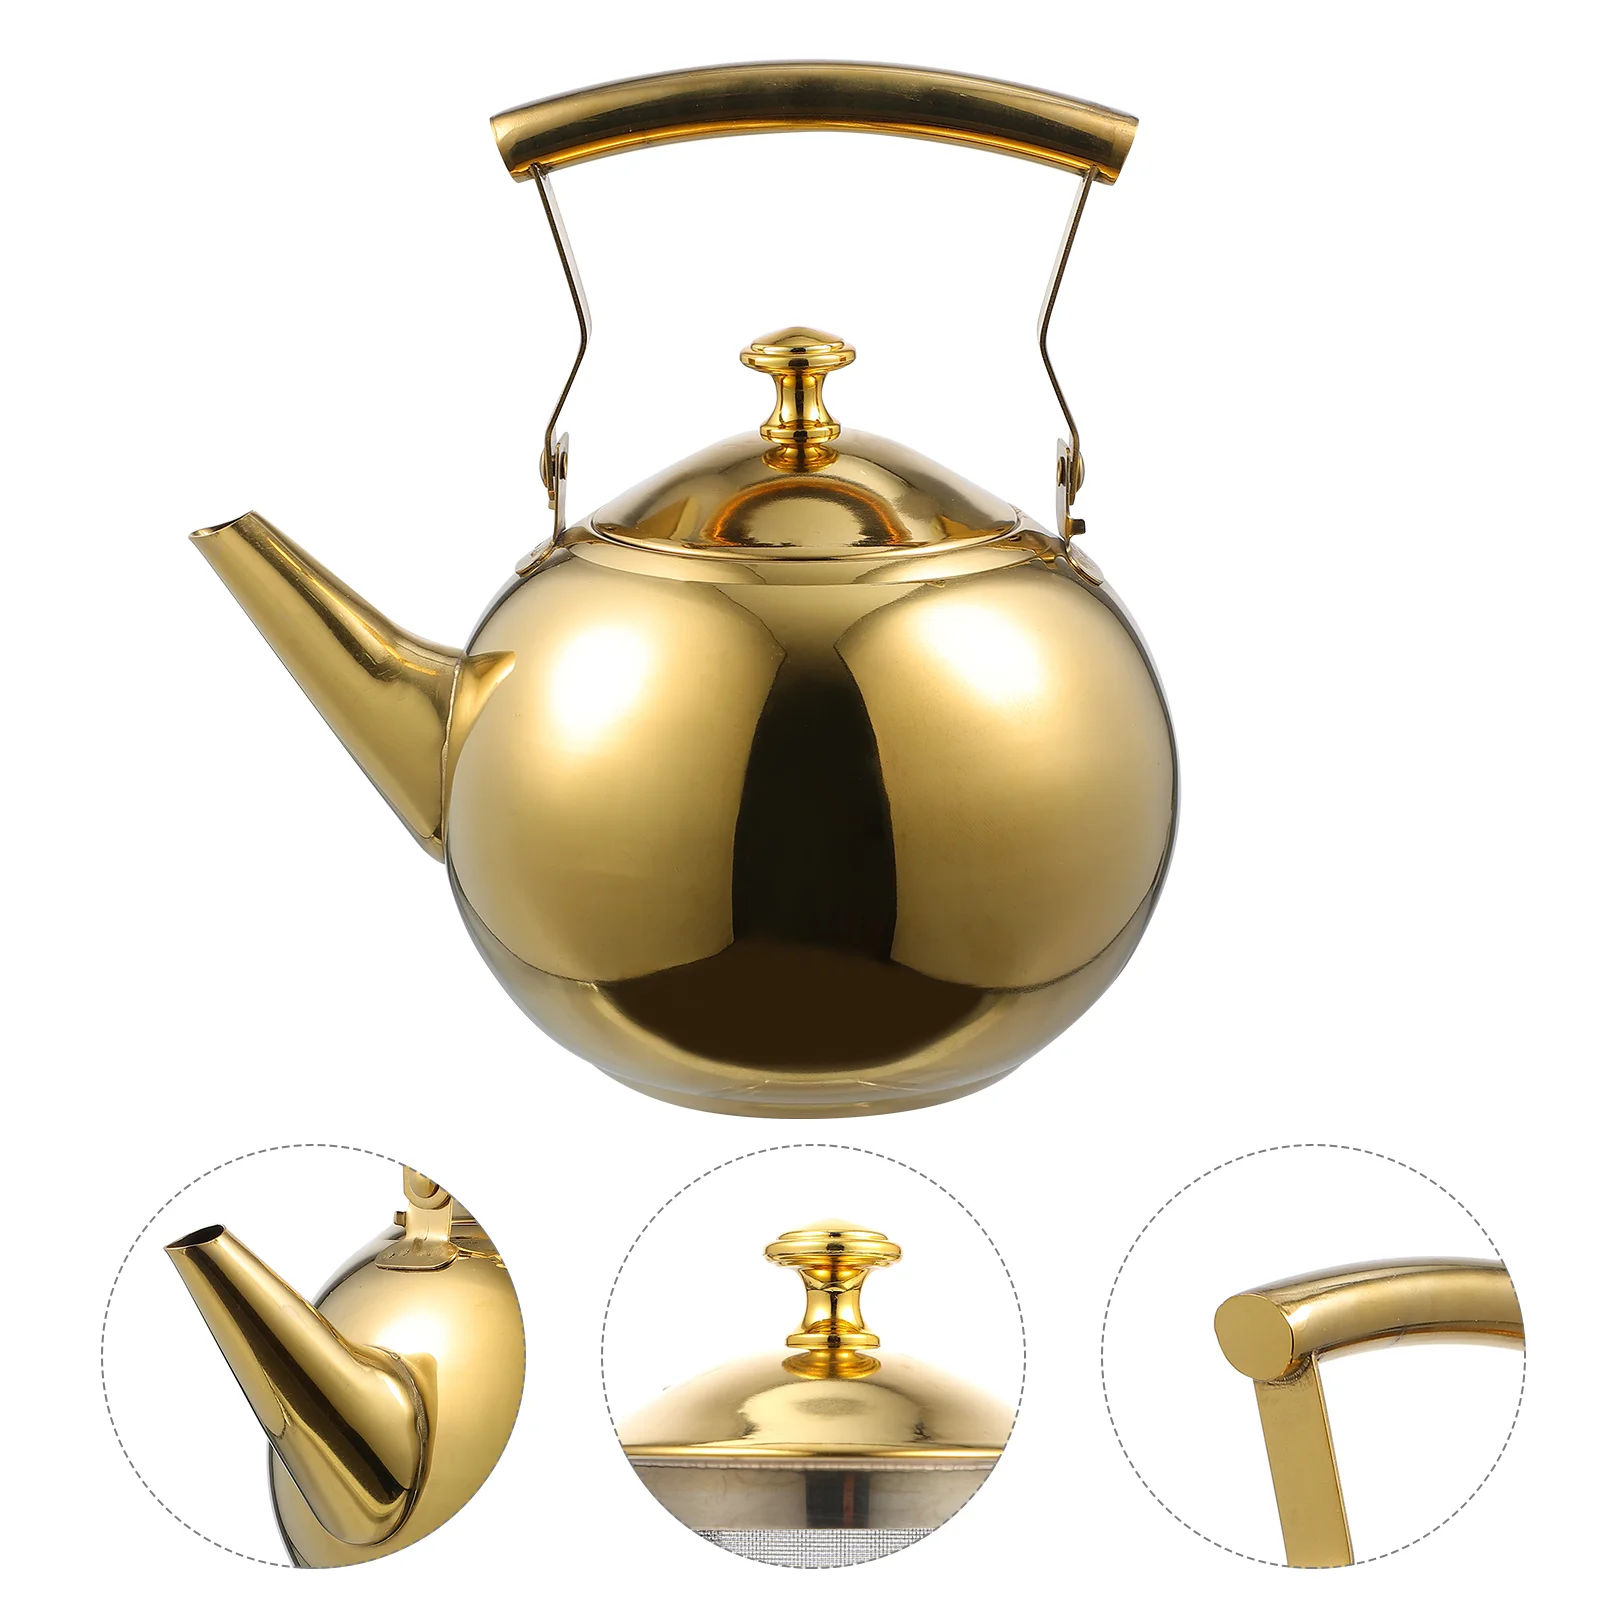 

Kettle Tea Stovetop Stainless Steel Whistling Teapot Stove Pot Water Boiling Kettles Gas Metal Infuser Coffee Teakettle Hot